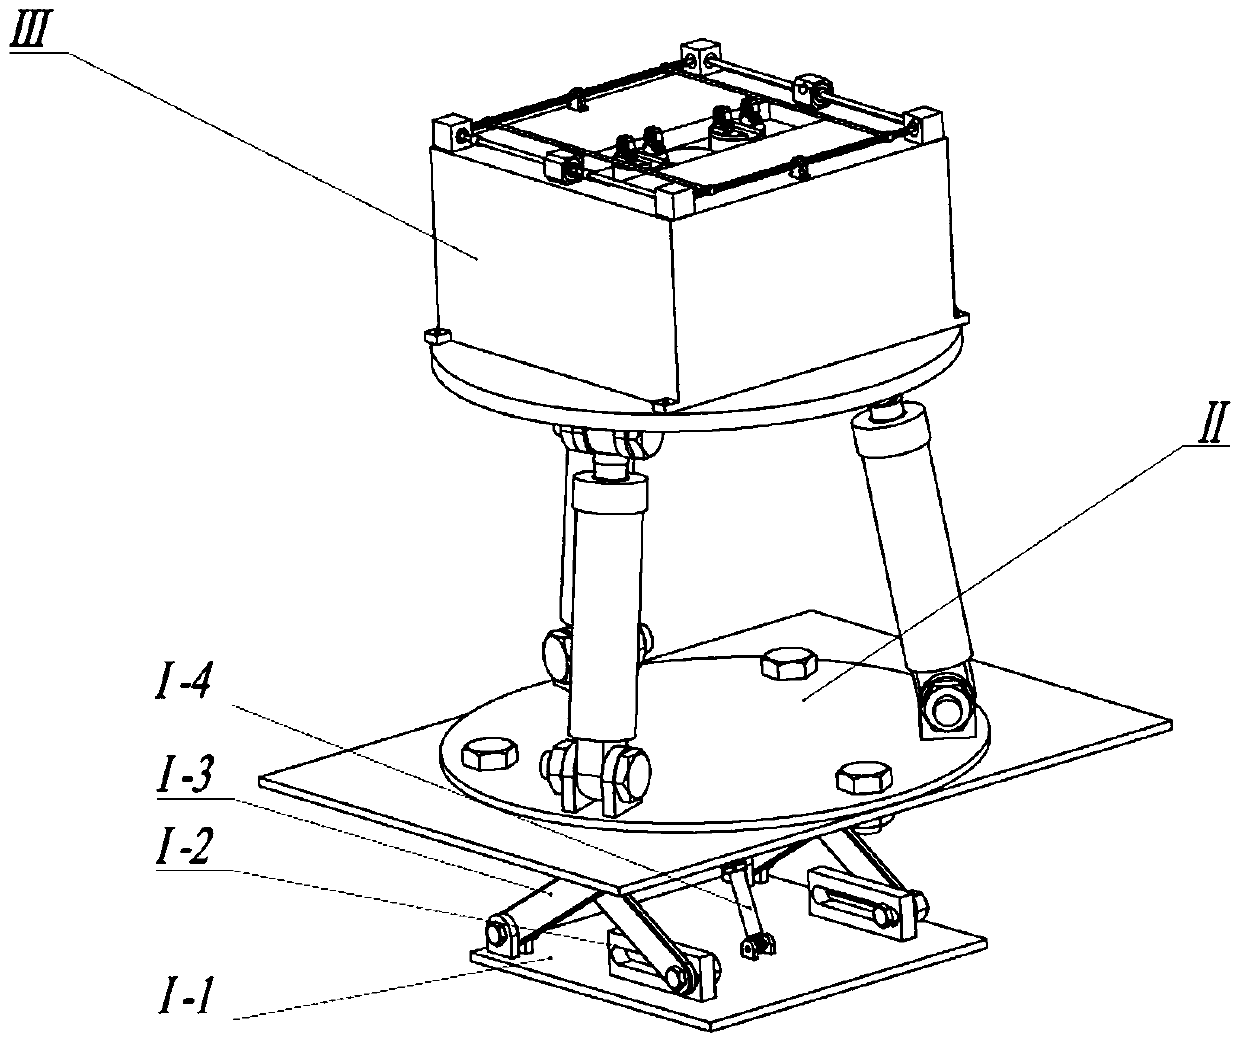 Unmanned aerial vehicle recycling and charging device based on parallel mechanism